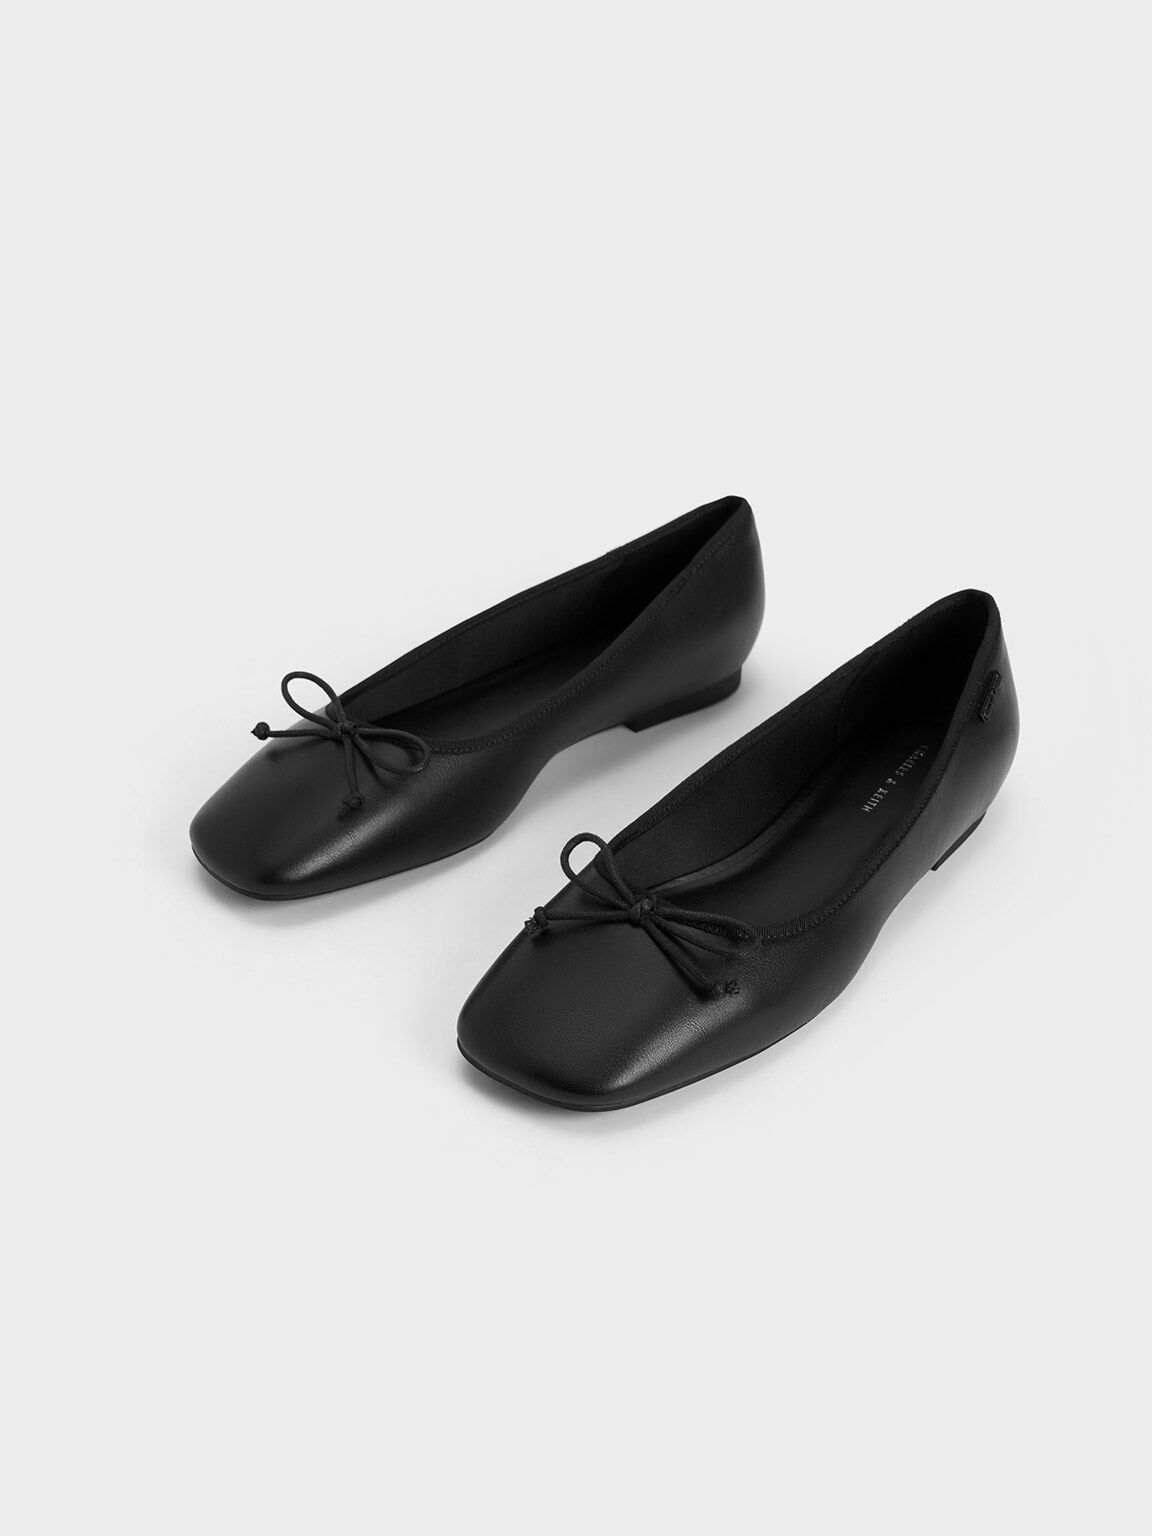 Rounded Square-Toe Bow Ballerinas, Black, hi-res